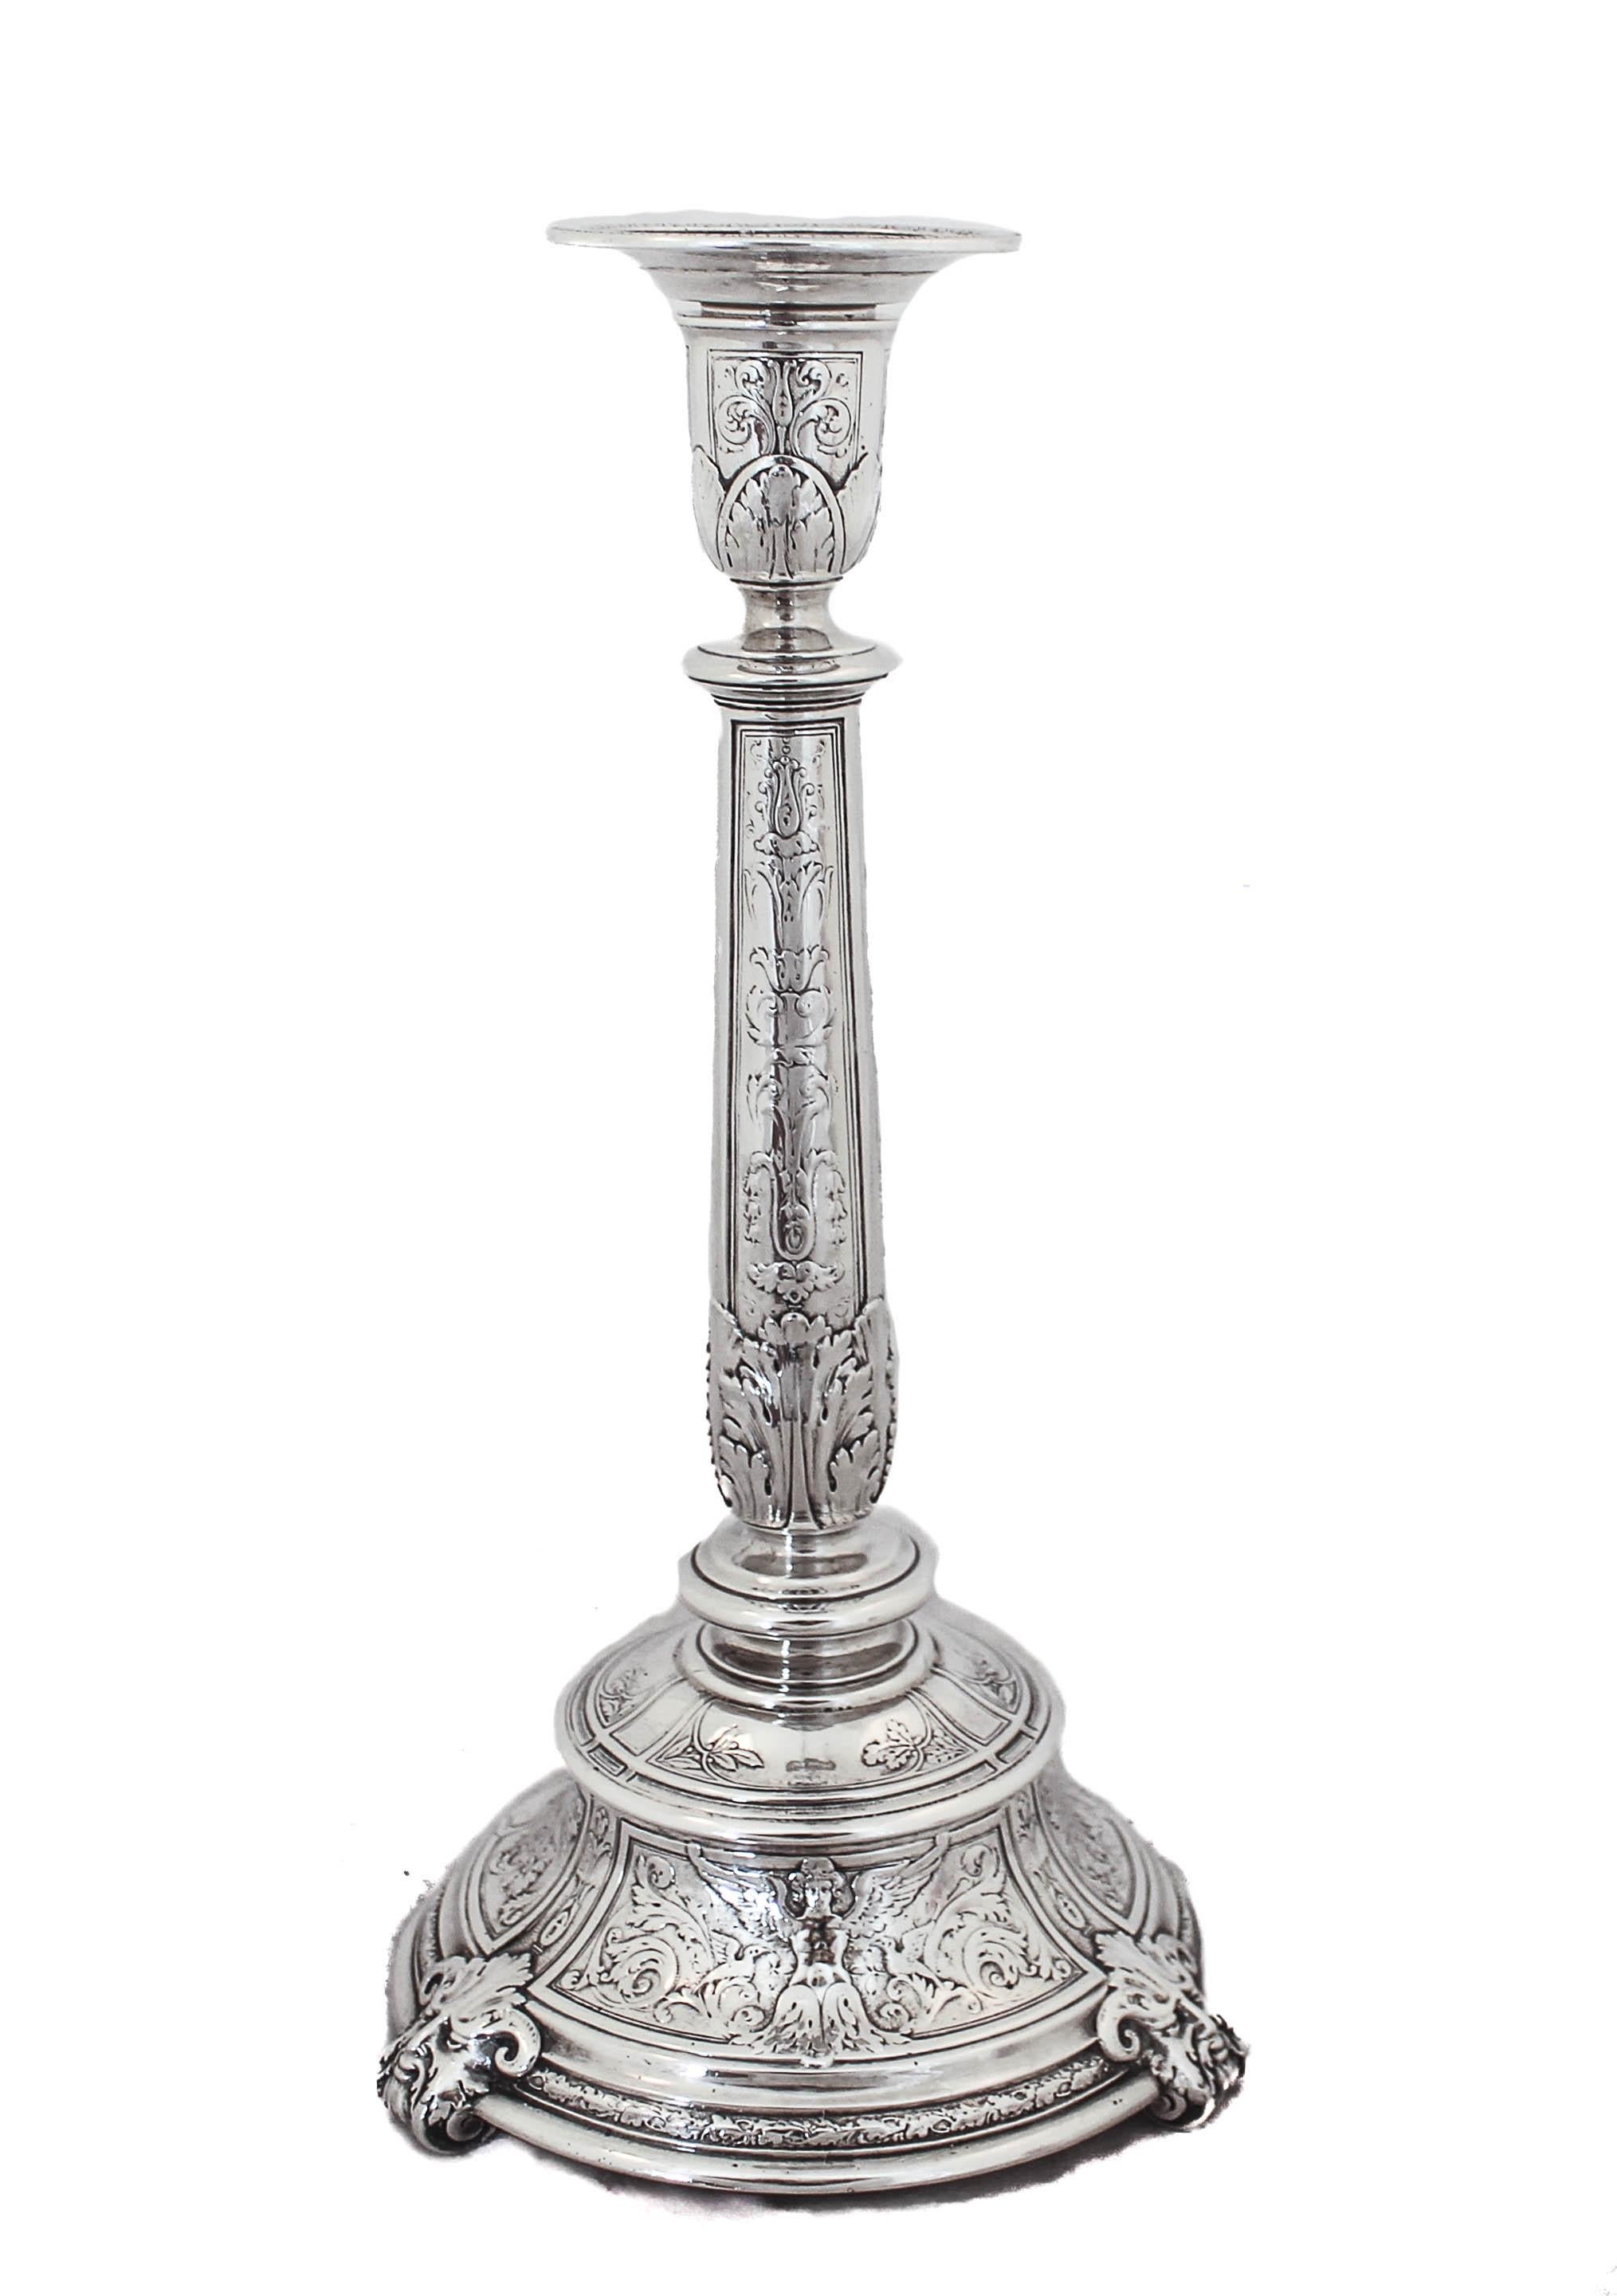 We are thrilled to offer you this pair of sterling silver candlesticks by Gorham Silversmiths of Providence, Rhode Island. Hallmarked 1926, these candlesticks are in the “Florenz” pattern. This beautiful design is an homage to Florence's celebrated